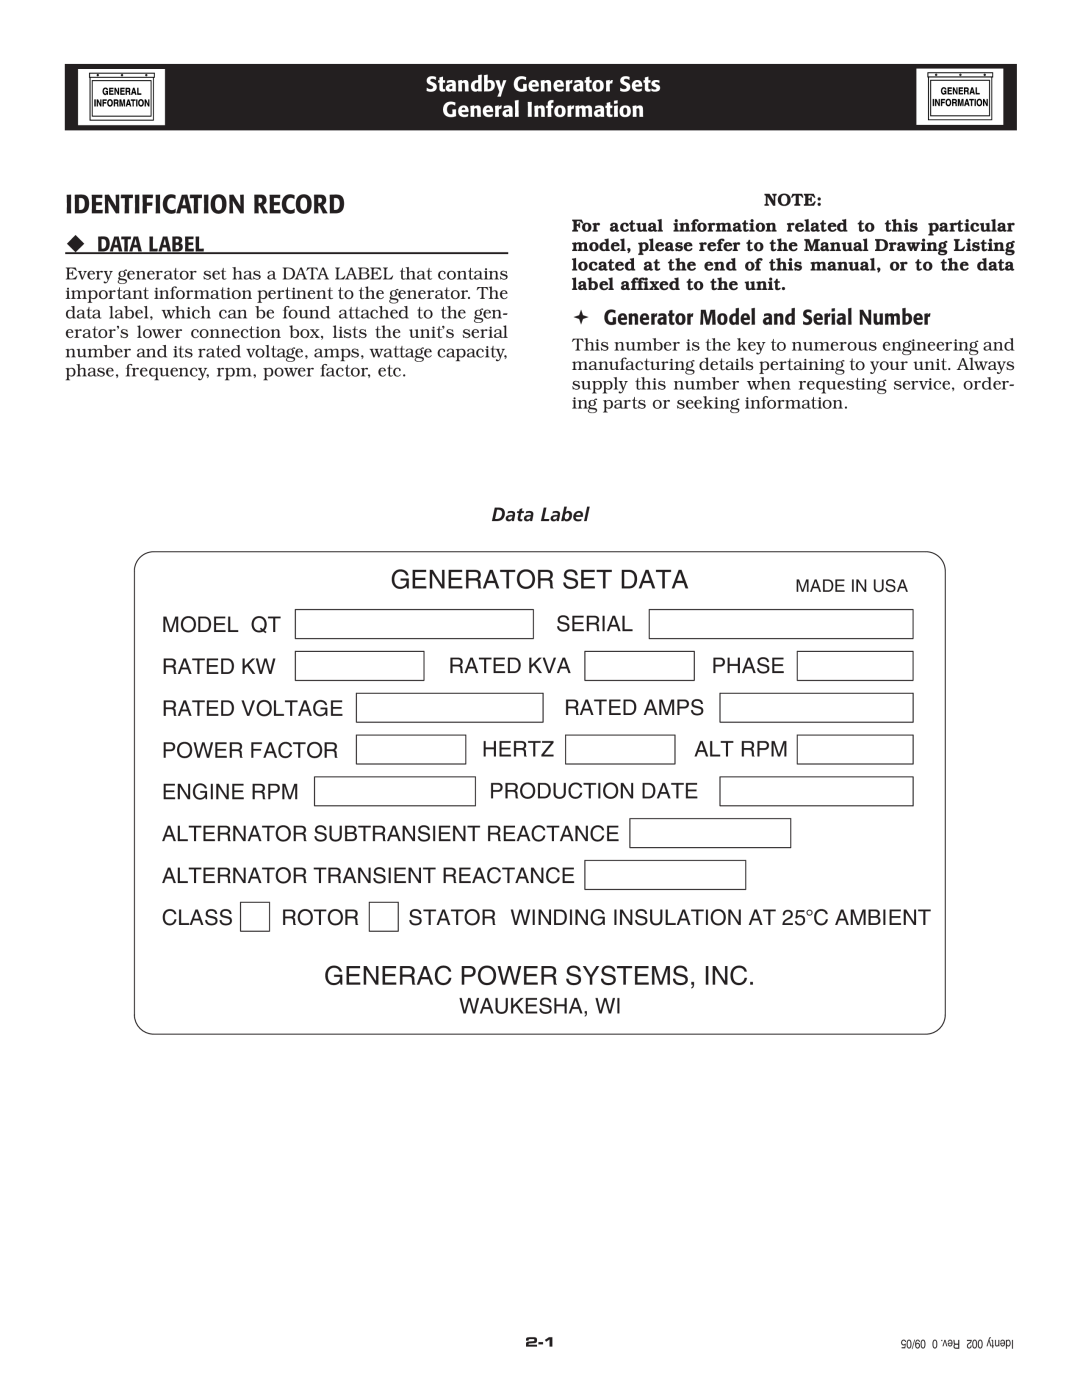 Generac Power Systems 005223-0 owner manual Identification Record, Standby Generator Sets General Information, ‹ Data Label 